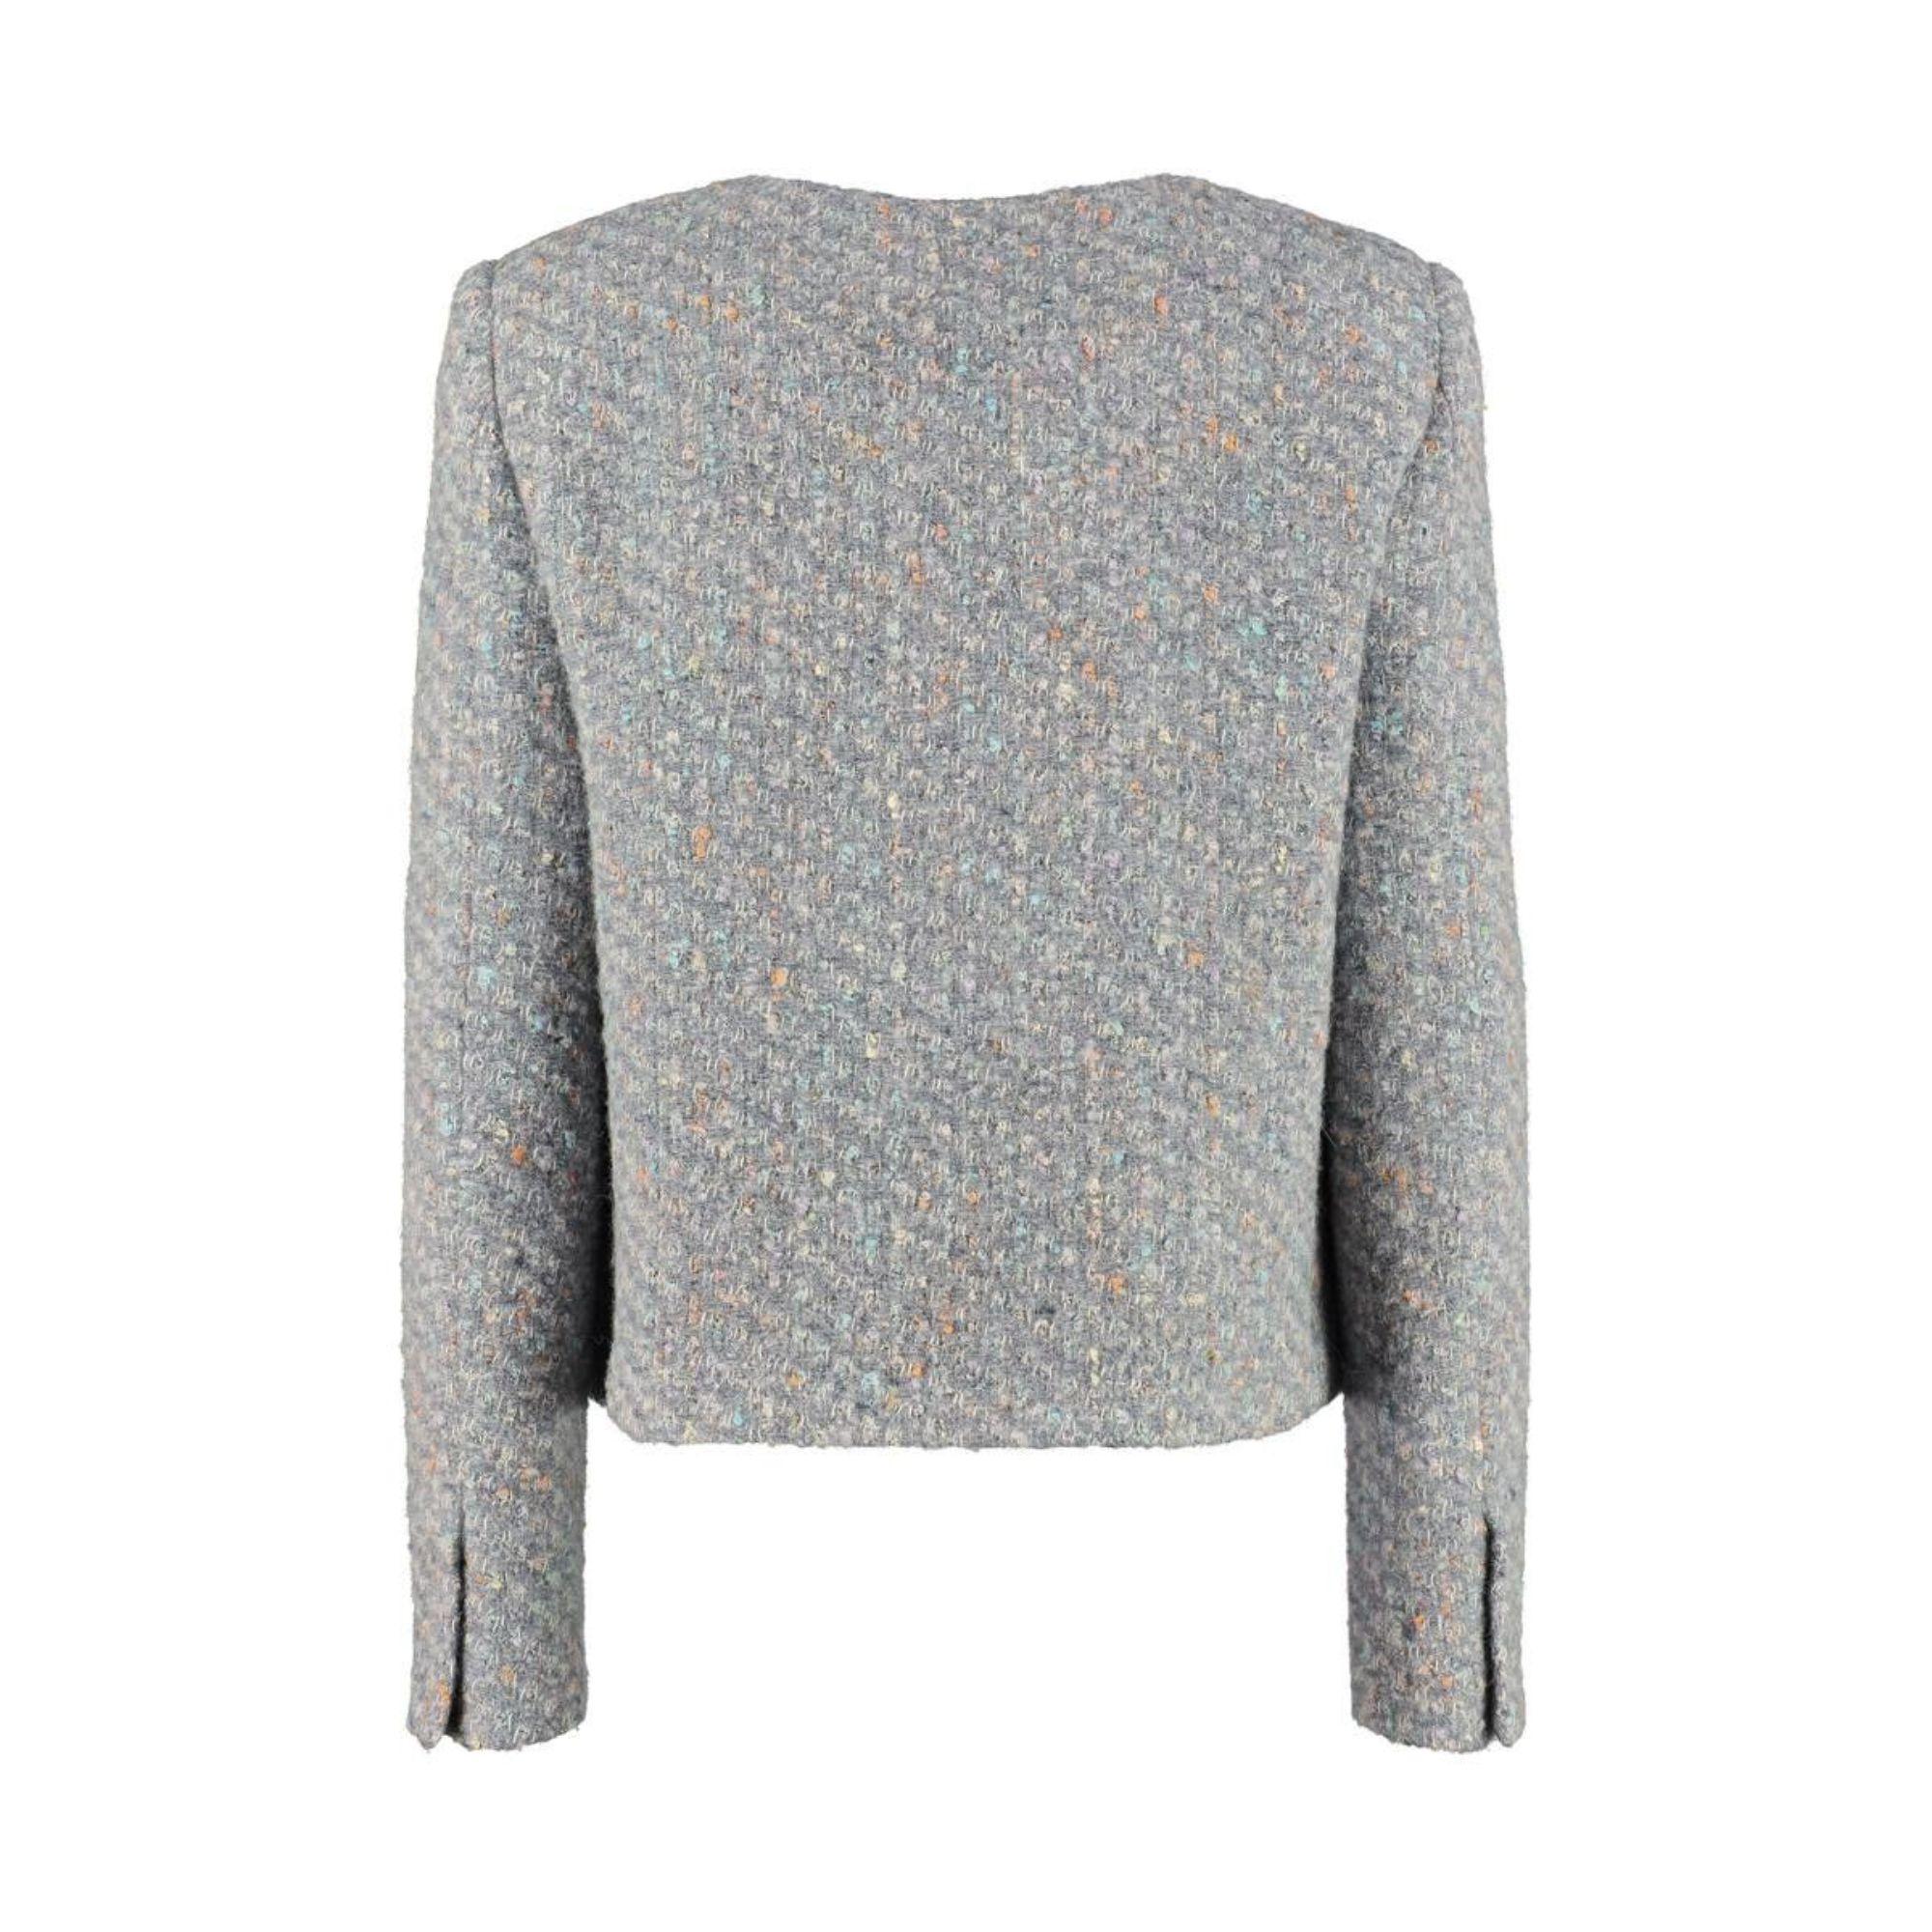 AW20 Moschino Couture Jeremy Scott Boucle Wool Jacket in Gray & Oversized Zipper

Additional Information:
Material: 53% Virgin Wool, 38% Cotton, 7% PL, 2% PC
Color: Gray, Light Blue, Orange, Purple
Size: IT 44 / US 10
Pattern: Abstract
Style: